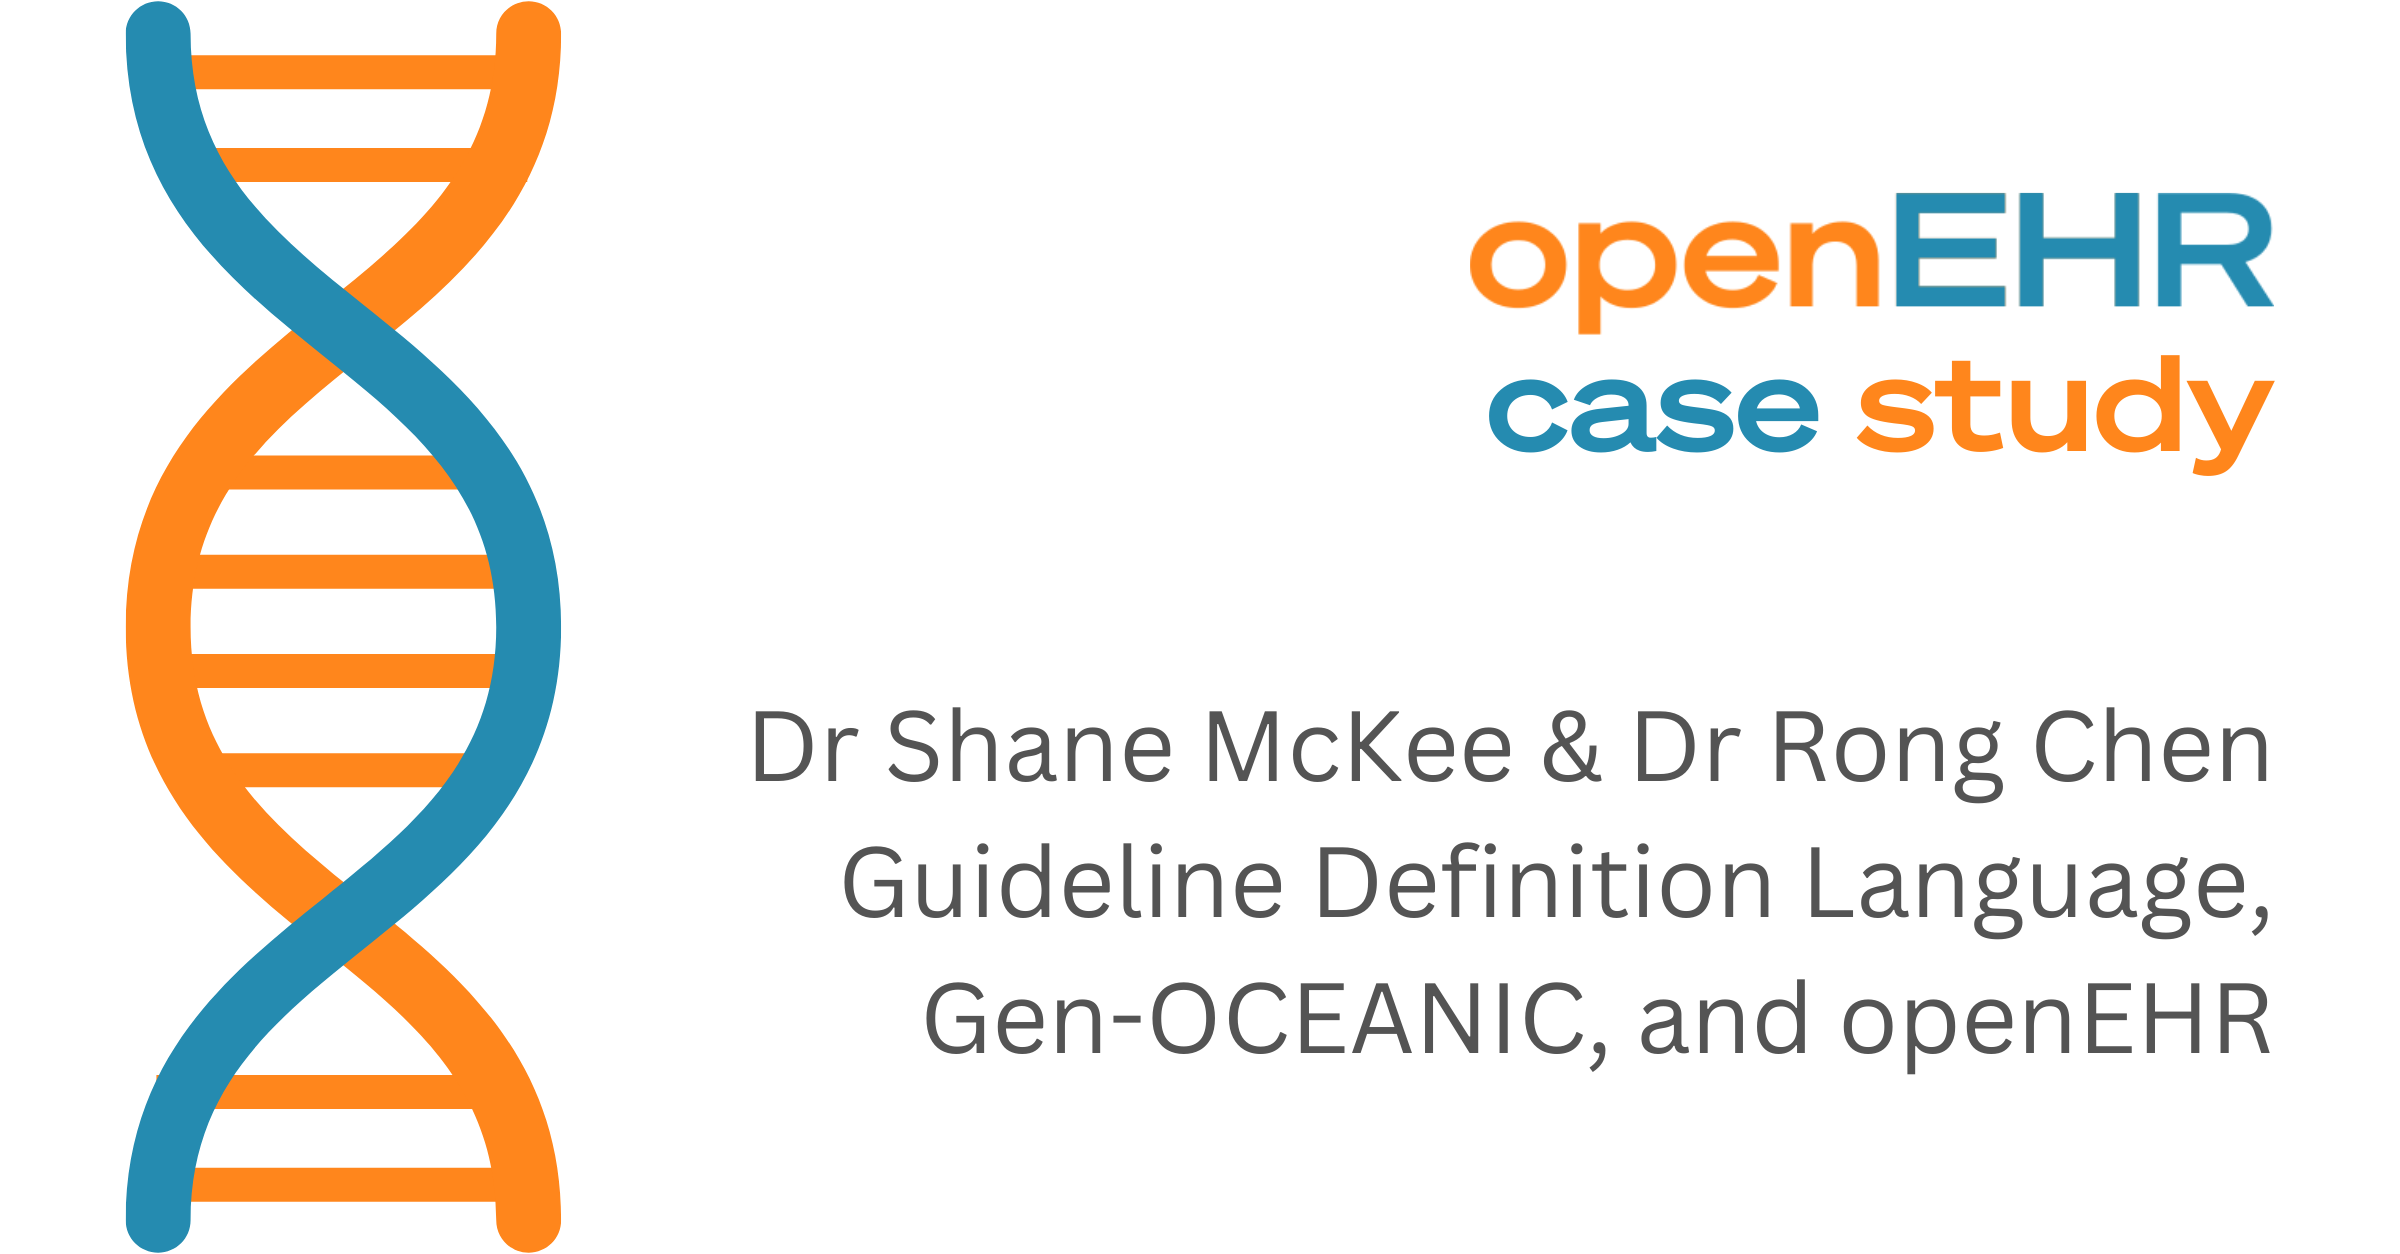 Dr Shane McKee & Dr Rong Chen discuss the intersection of Guideline Definition Language, Gen-OCEANIC, and openEHR